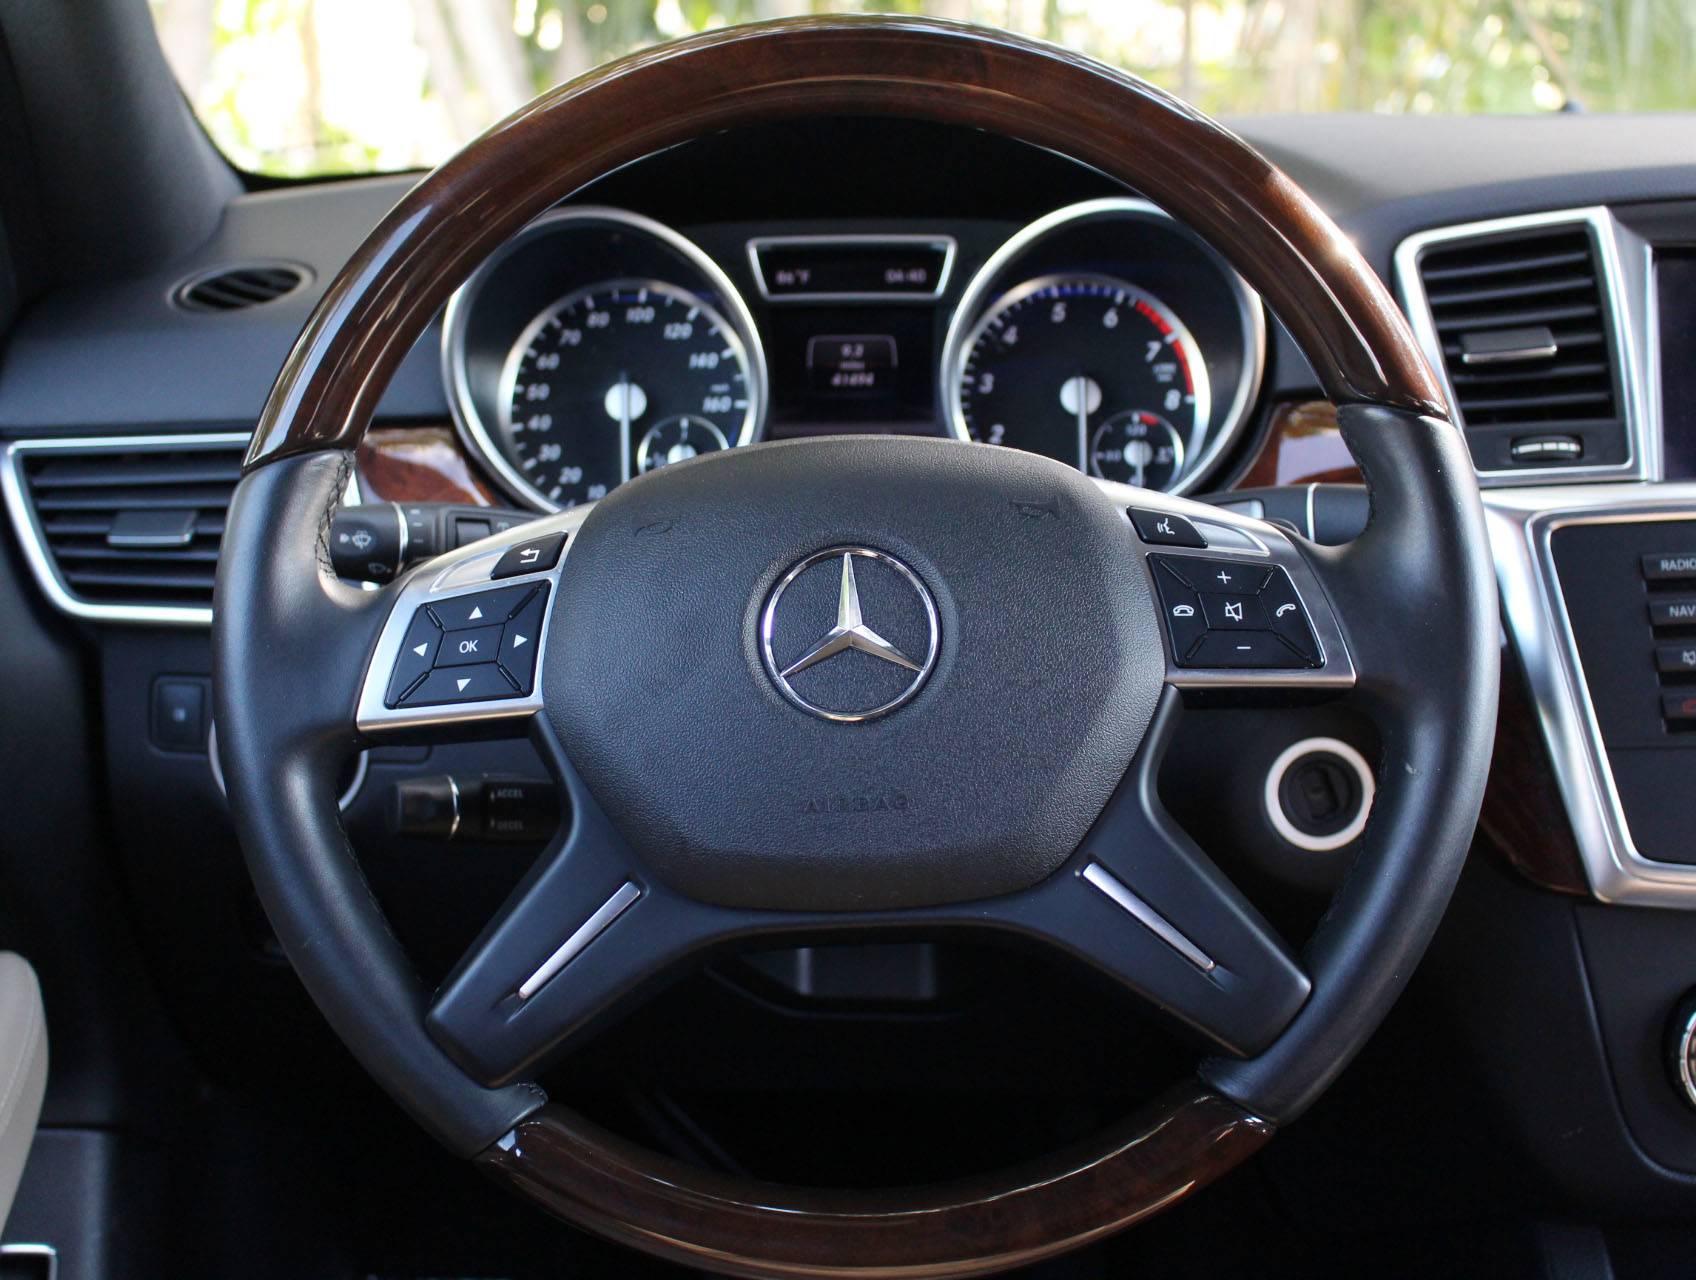 Florida Fine Cars - Used MERCEDES-BENZ M CLASS 2013 WEST PALM ML350